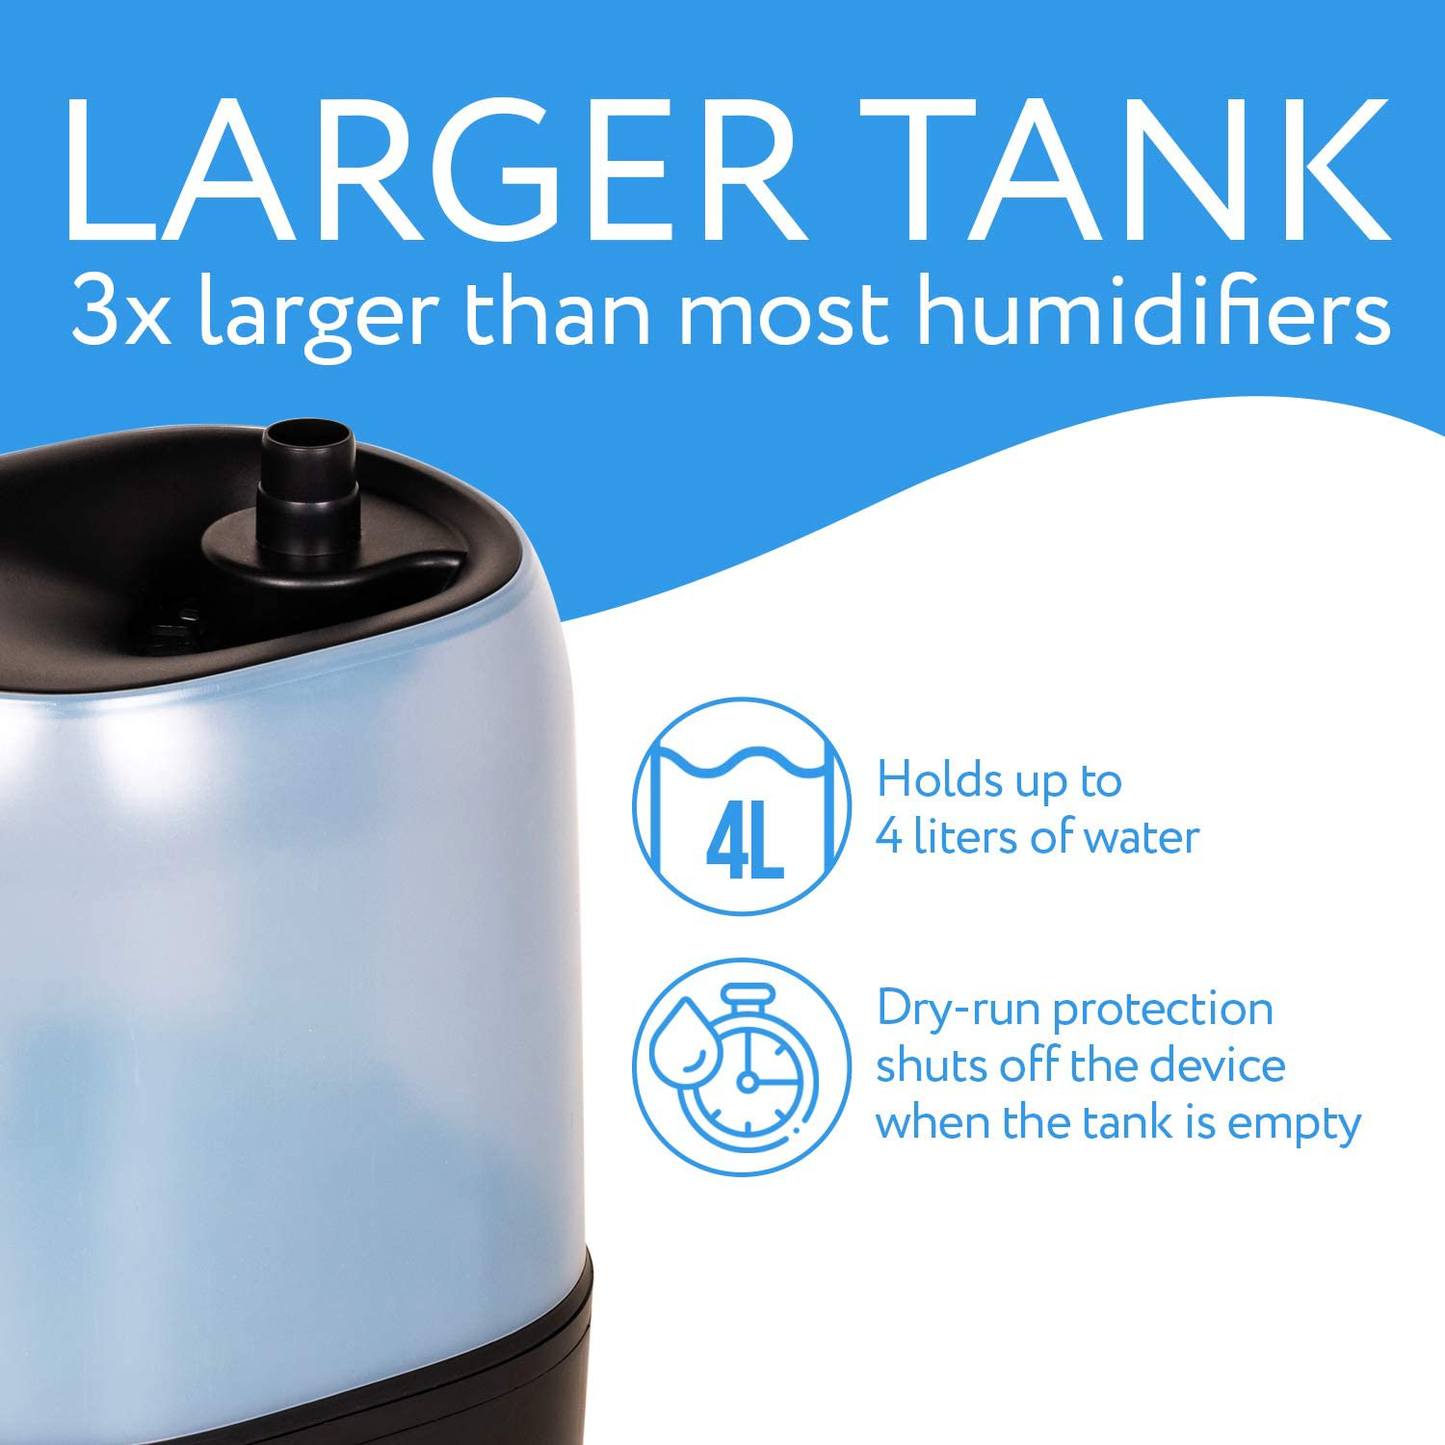 Reptile Humidifier/Fogger - 4L Tank - New Digital Timer - Add Water from Top! for Reptiles/Amphibians/Herps - Compatible with All Terrariums and Enclosures